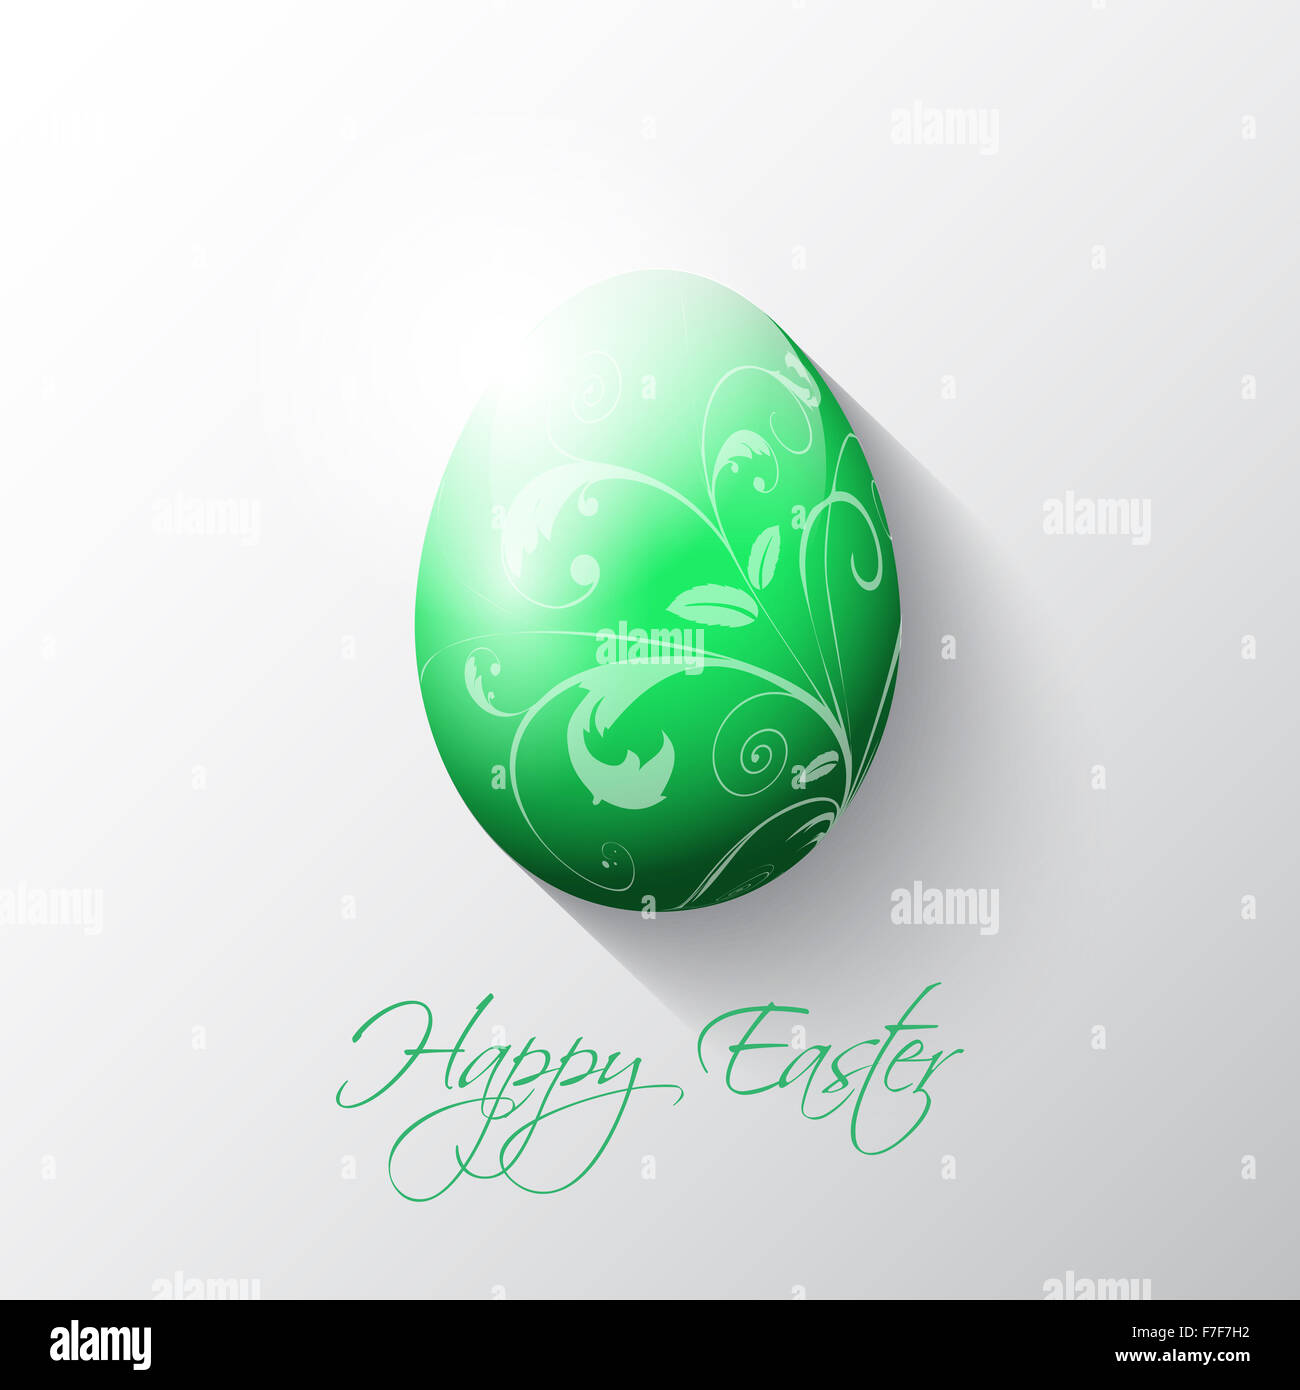 Easter background with decorative floral design Stock Photo